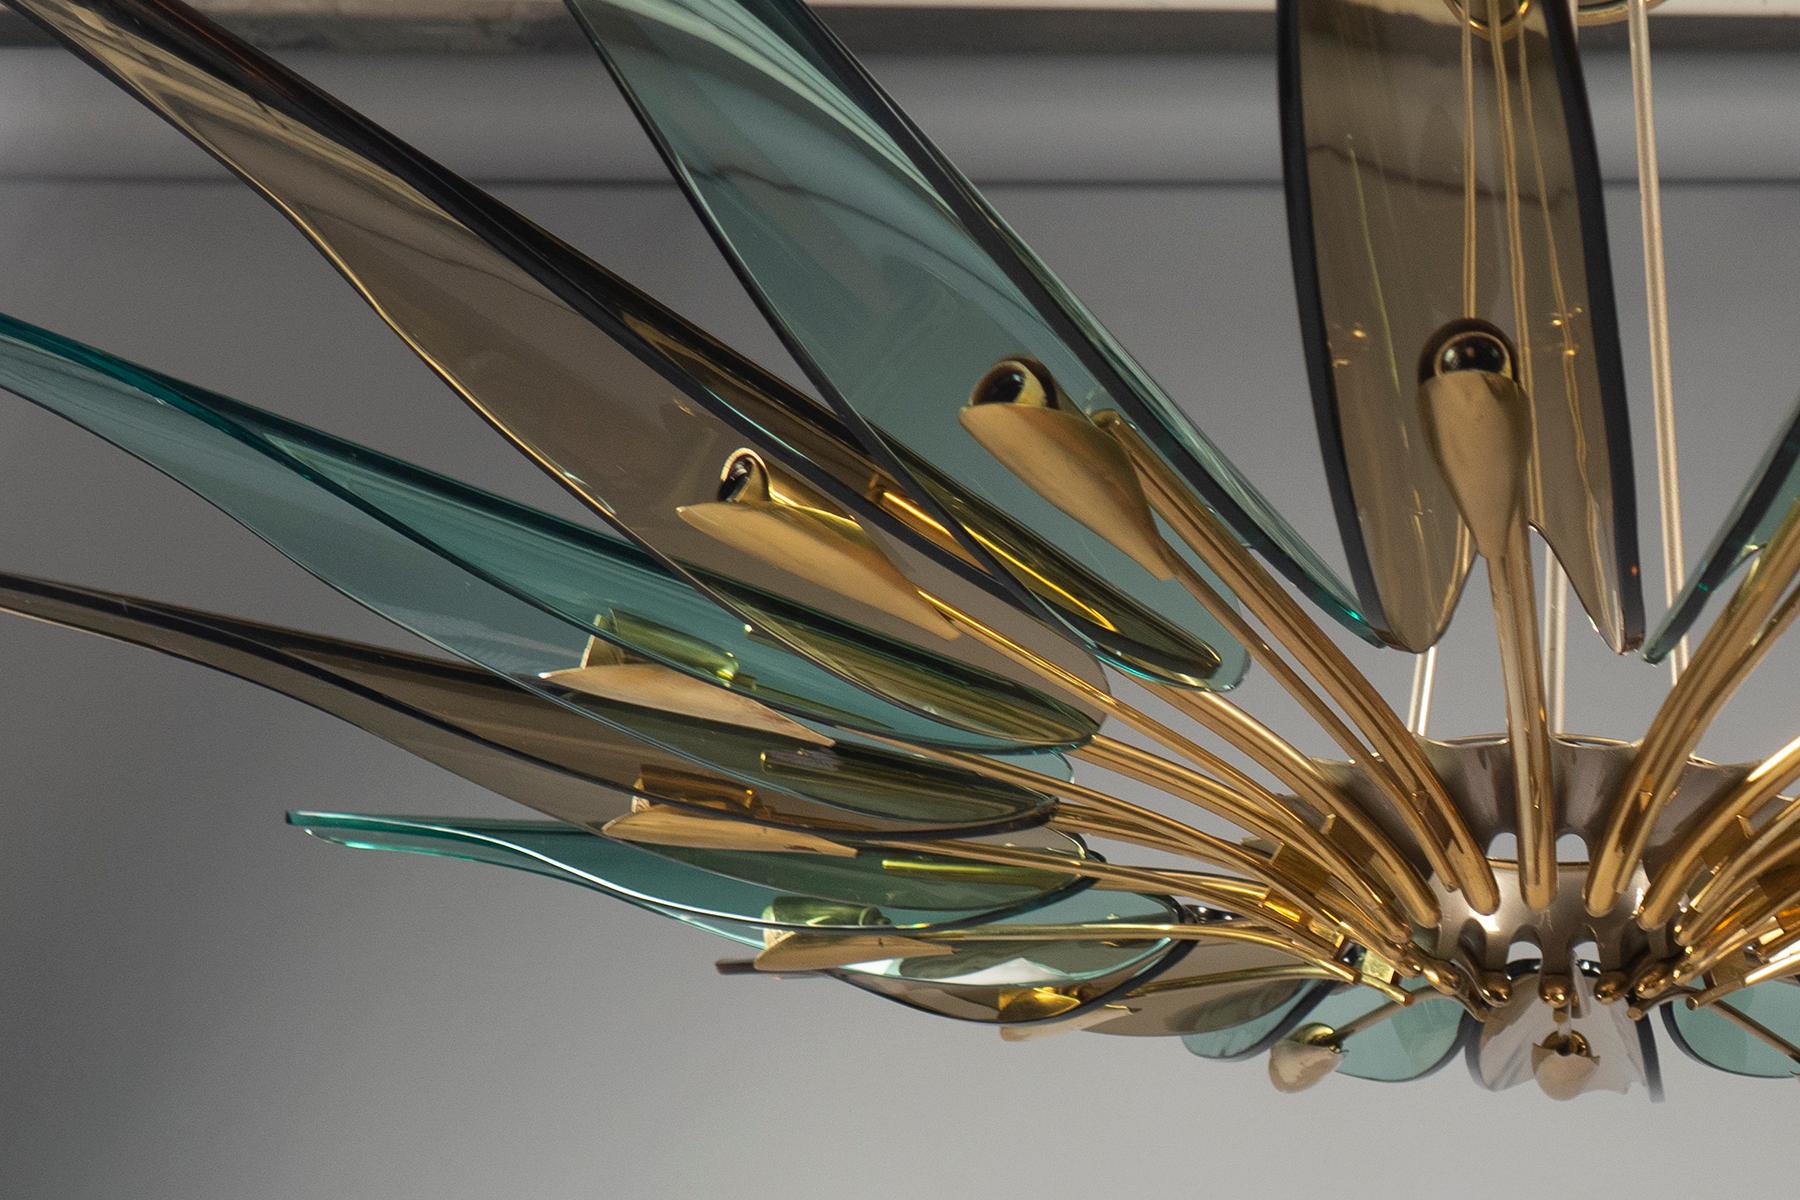 Chandelier composed of sixteen translucent green and amber glass “petals” mounted to a radial brass structure, suspended from three rods and matching canopy. Fontana Arte model number 1563. Literature: Franco Deboni’s Fontana Arte: Gio Ponti, Pietro